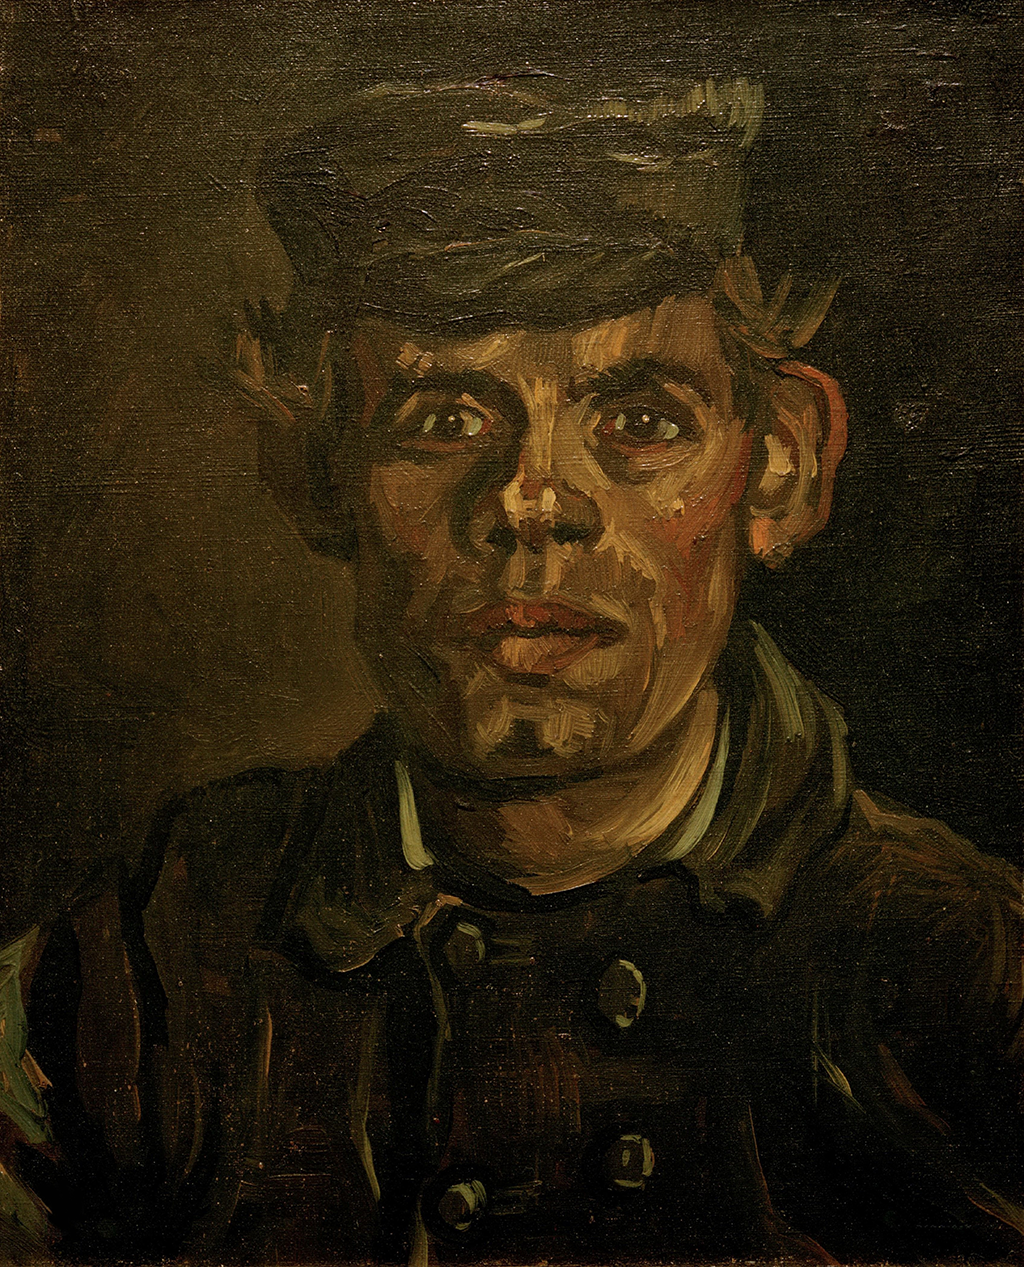 A portrait painting of a man. He wears are darker hat or cap made with dark greens, grays, and browns, this color is mirrored also within his collared button shirt. His face is made up with light and dark brown strokes.